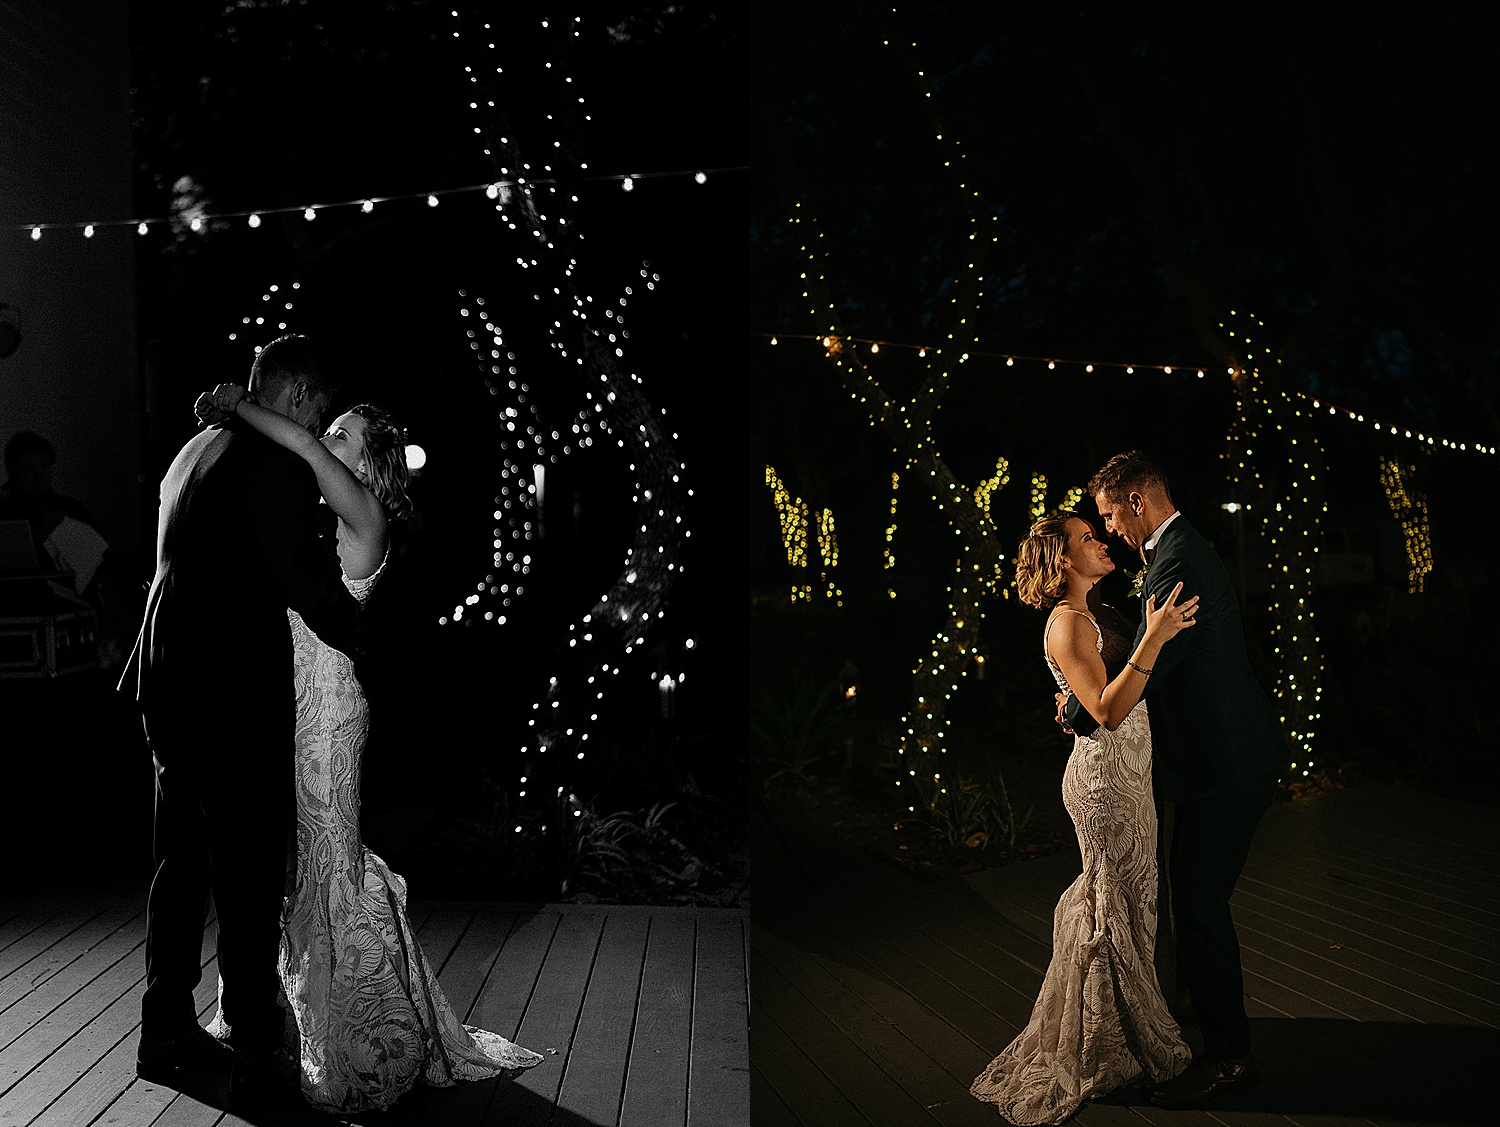 Bride and groom share first dance under string lights at wedding reception